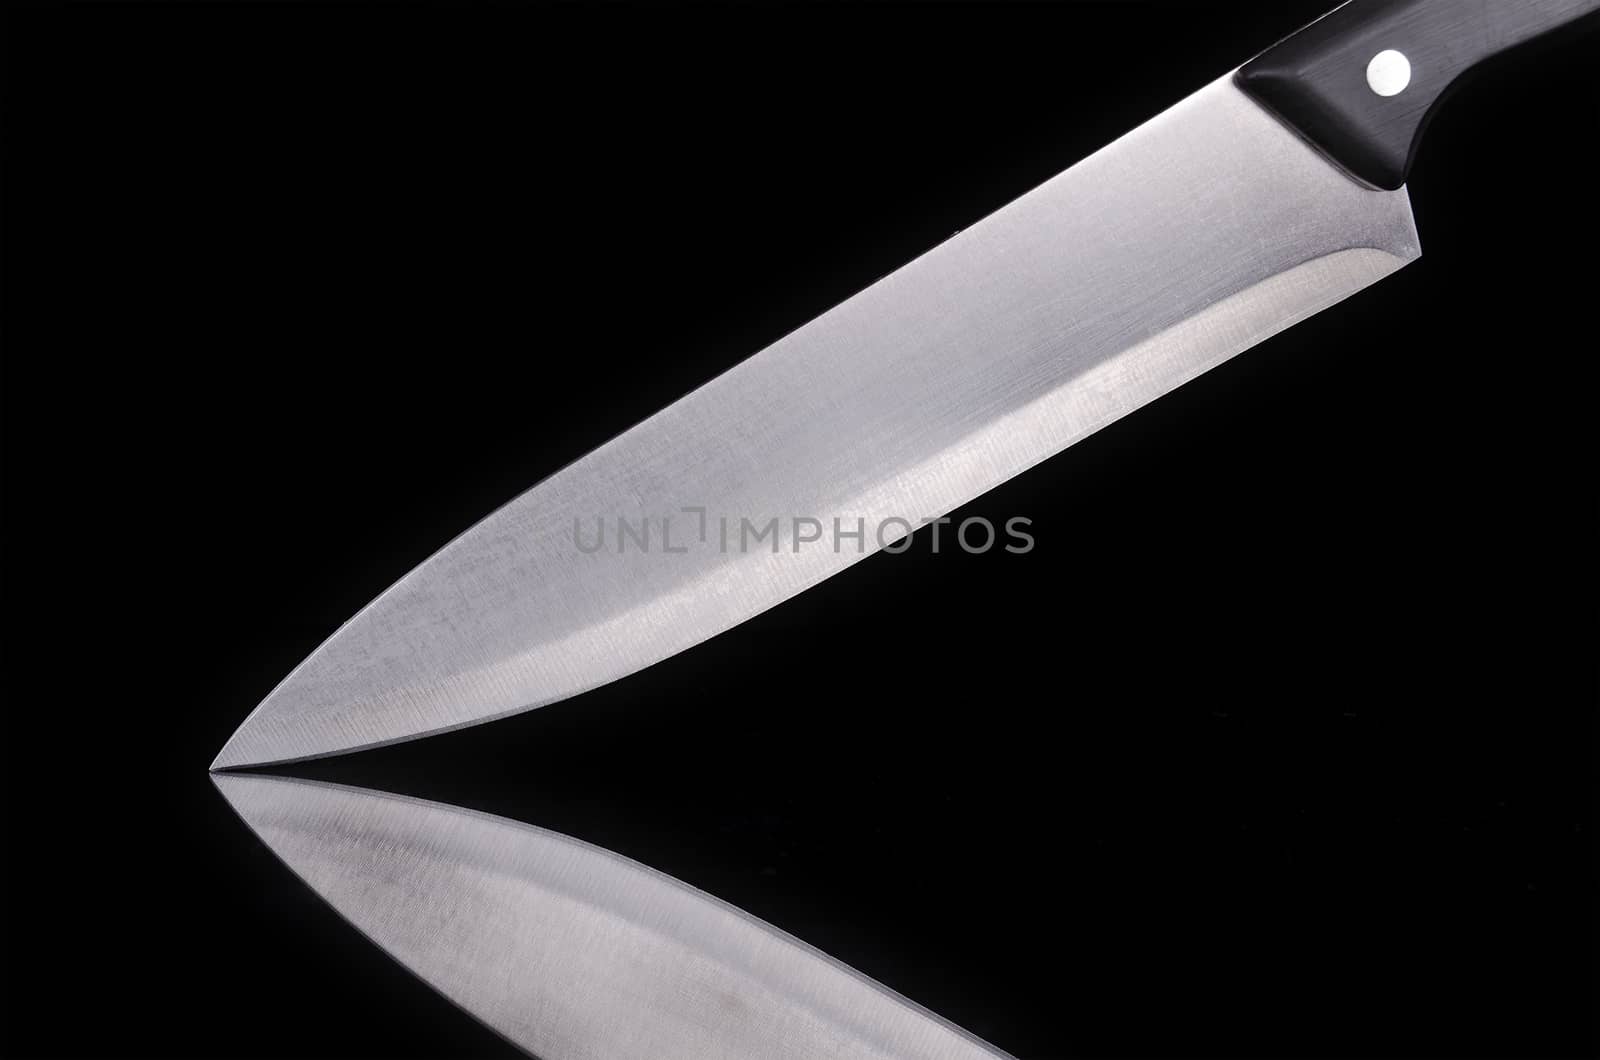 Close up view of a kitchen knife over black isolated background